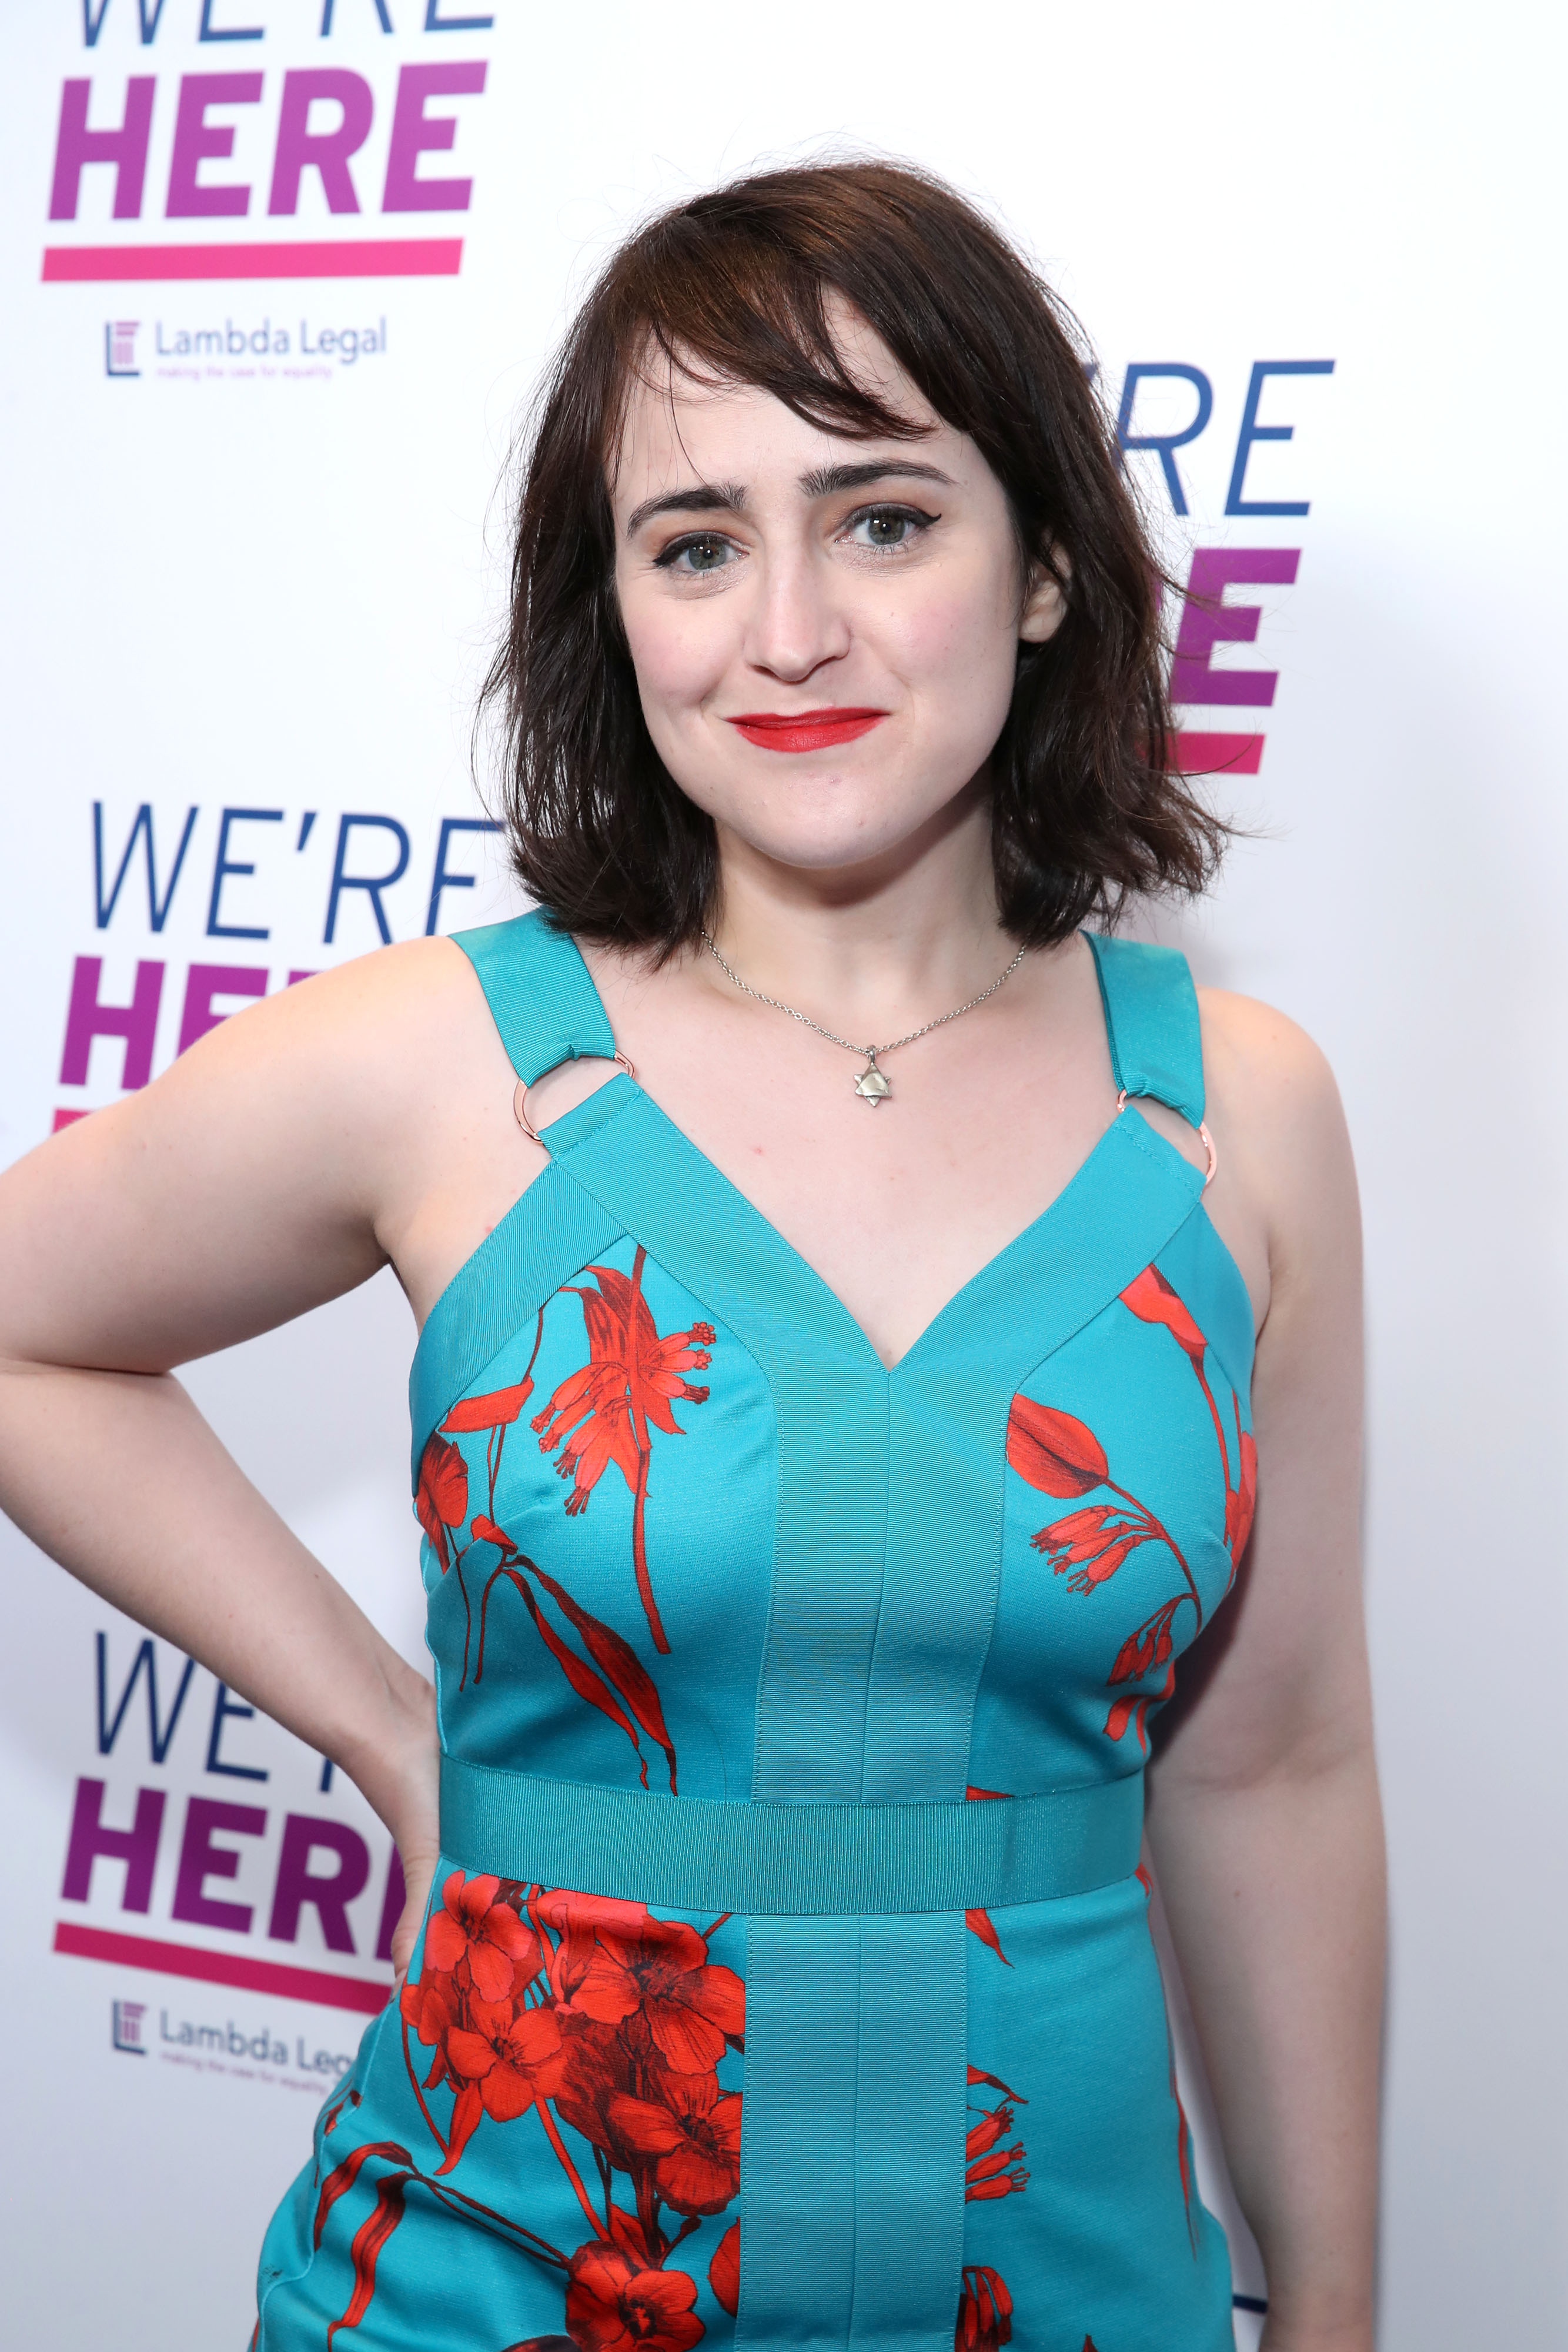 Mara Wilson attends the West Coast Liberty Awards at SLS Hotel in Los Angeles, California, on May 30, 2019. | Source: Getty Images